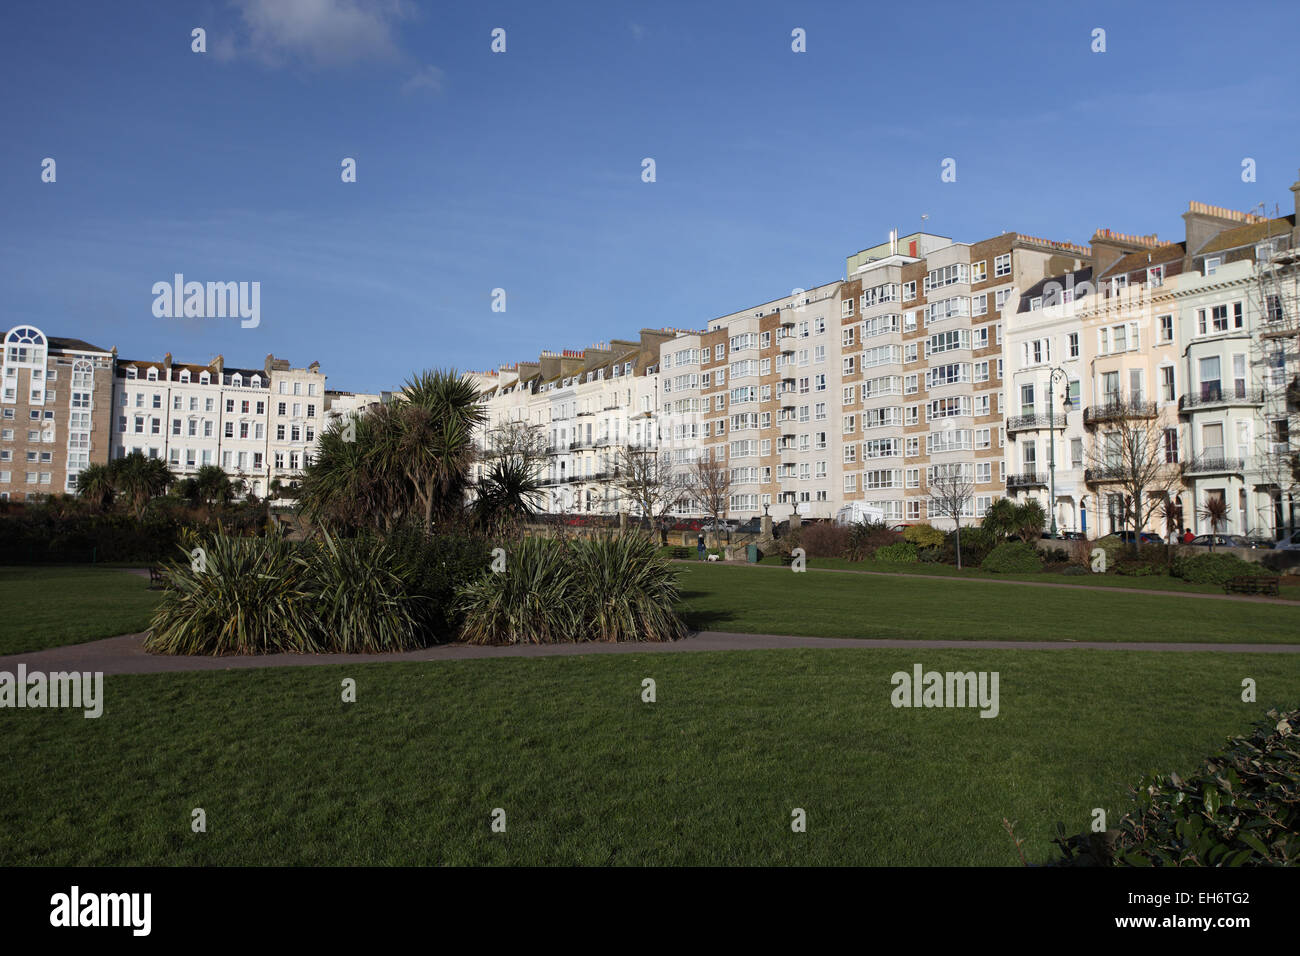 Warrior Square Gardens, St Leonards-On-mare, Hastings, East Sussex Foto Stock